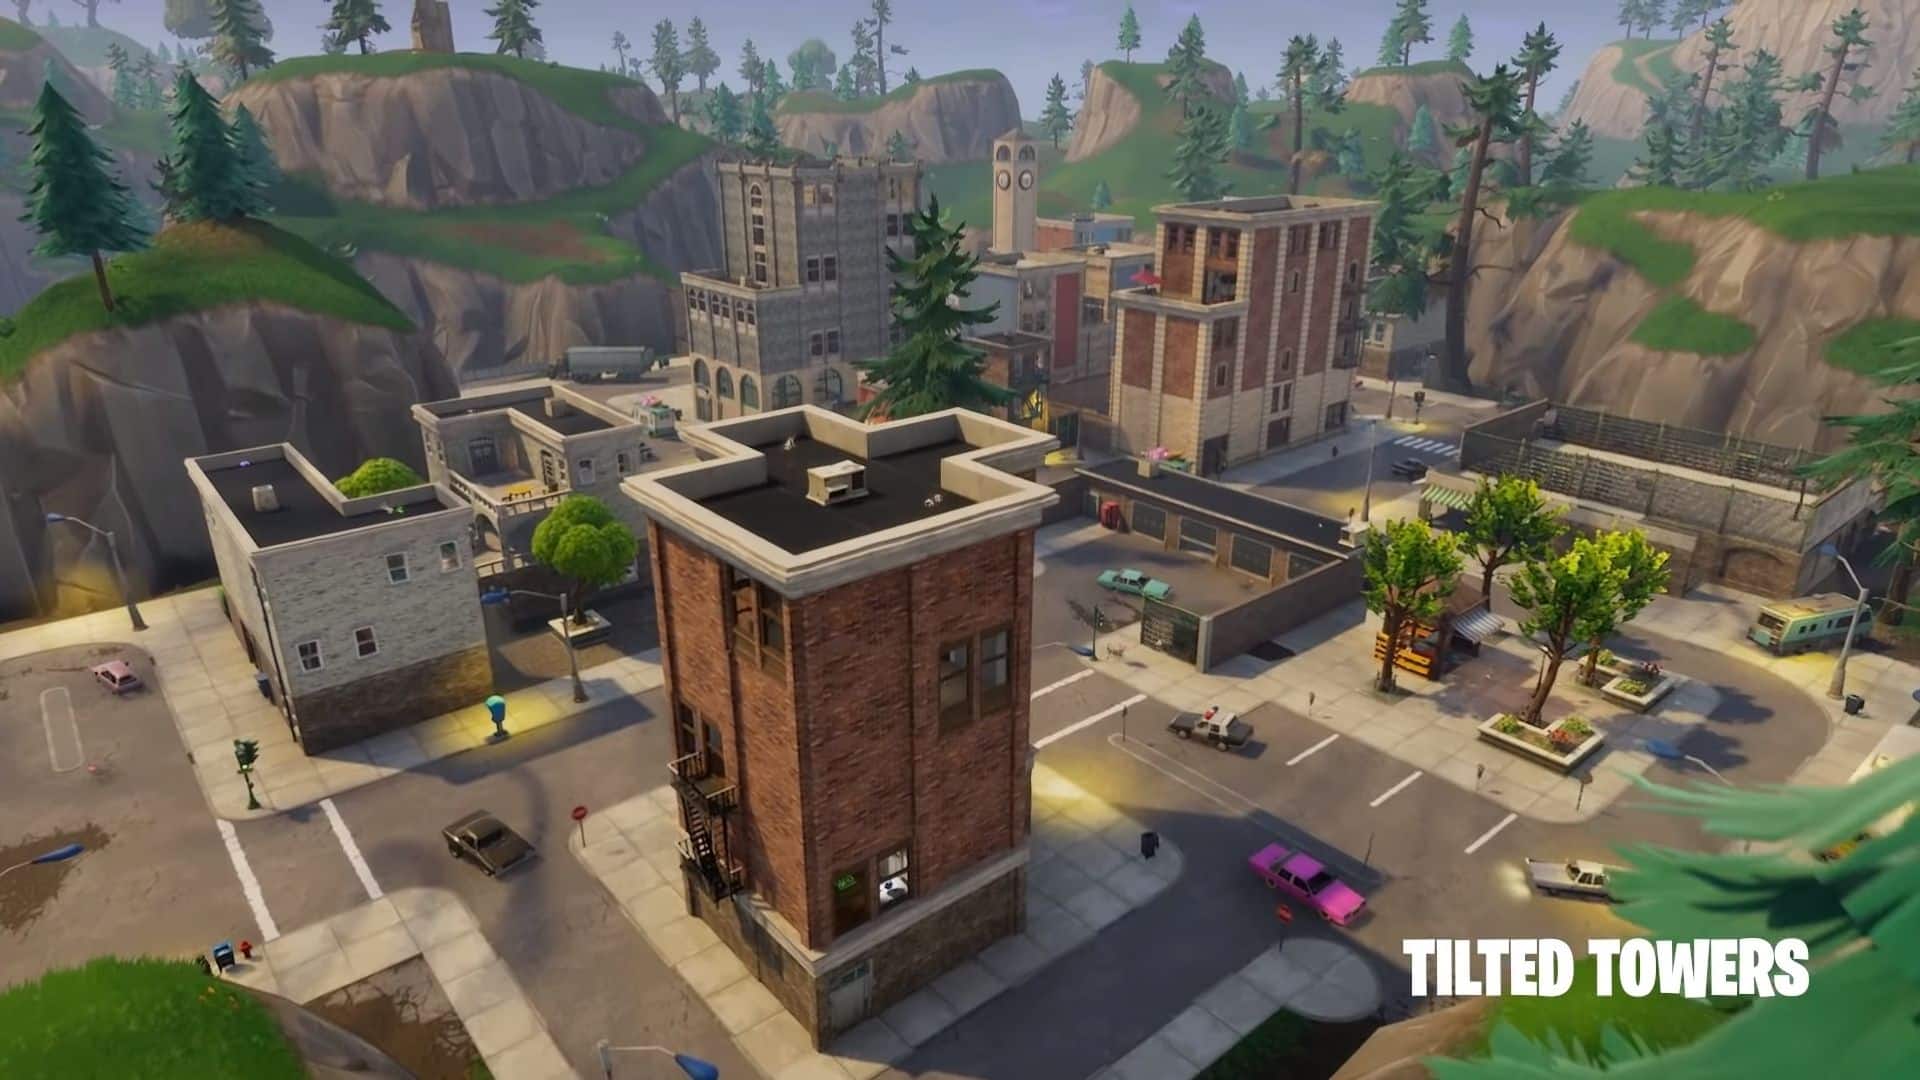 tilted towers in fortnite